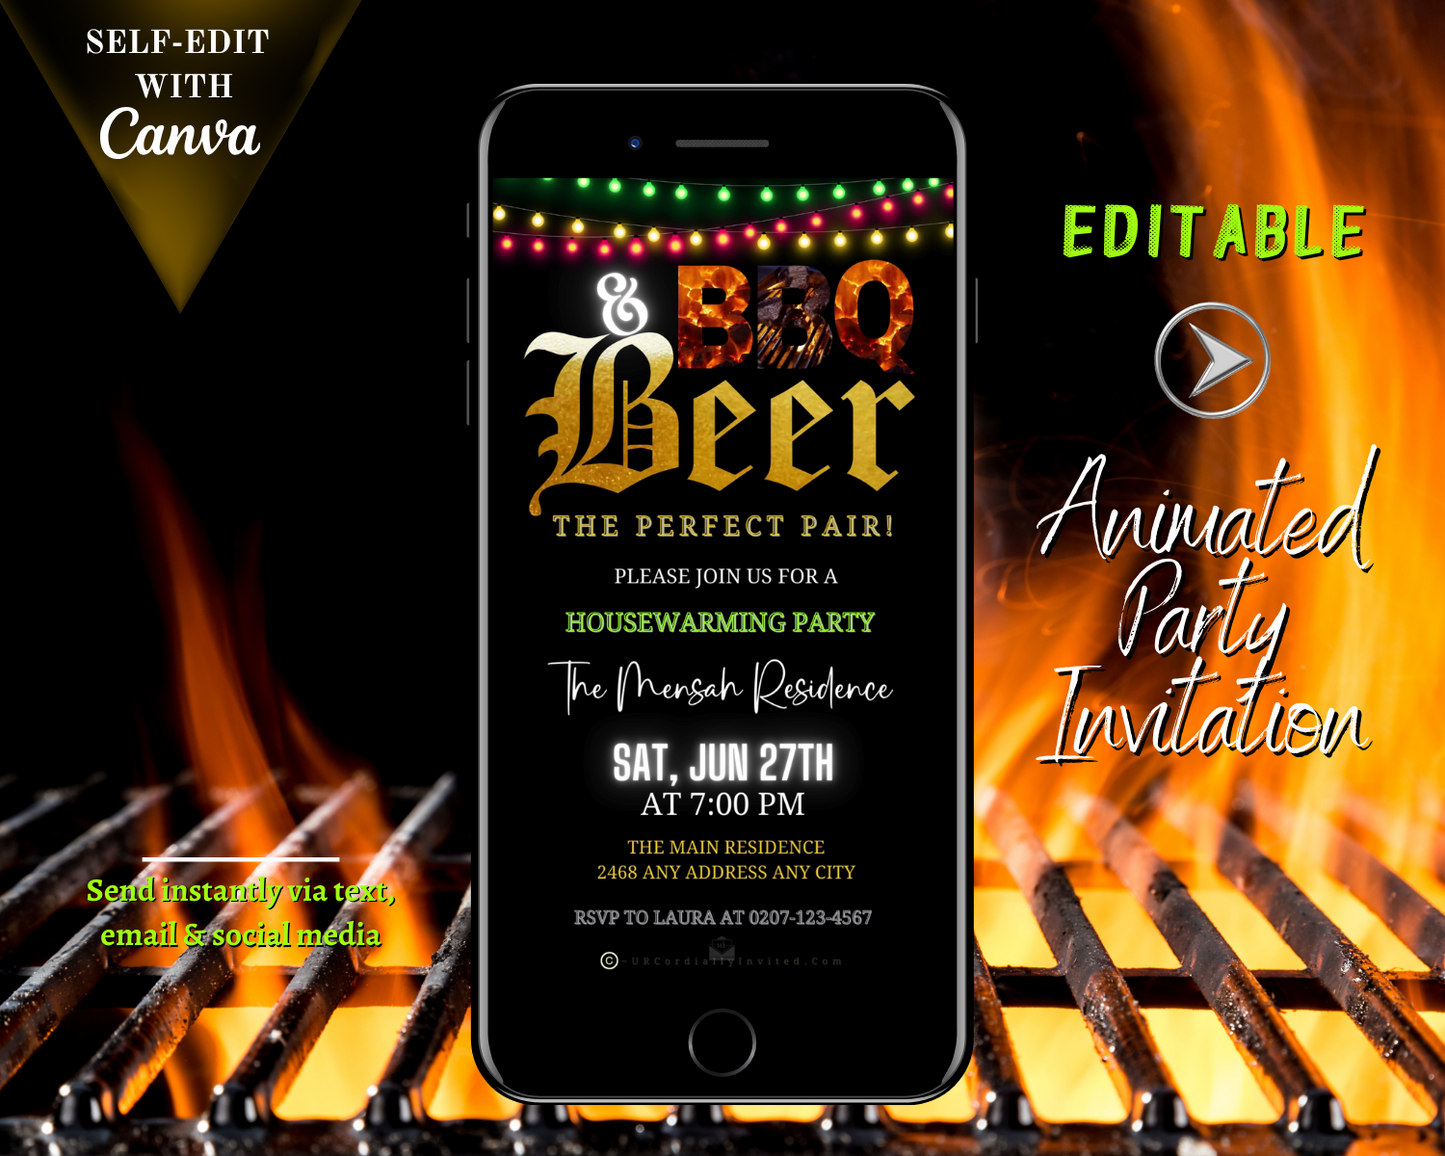 BBQ Flame & Beer Digital Video Party Invite displayed on a smartphone screen, showcasing customizable text and images for event details.